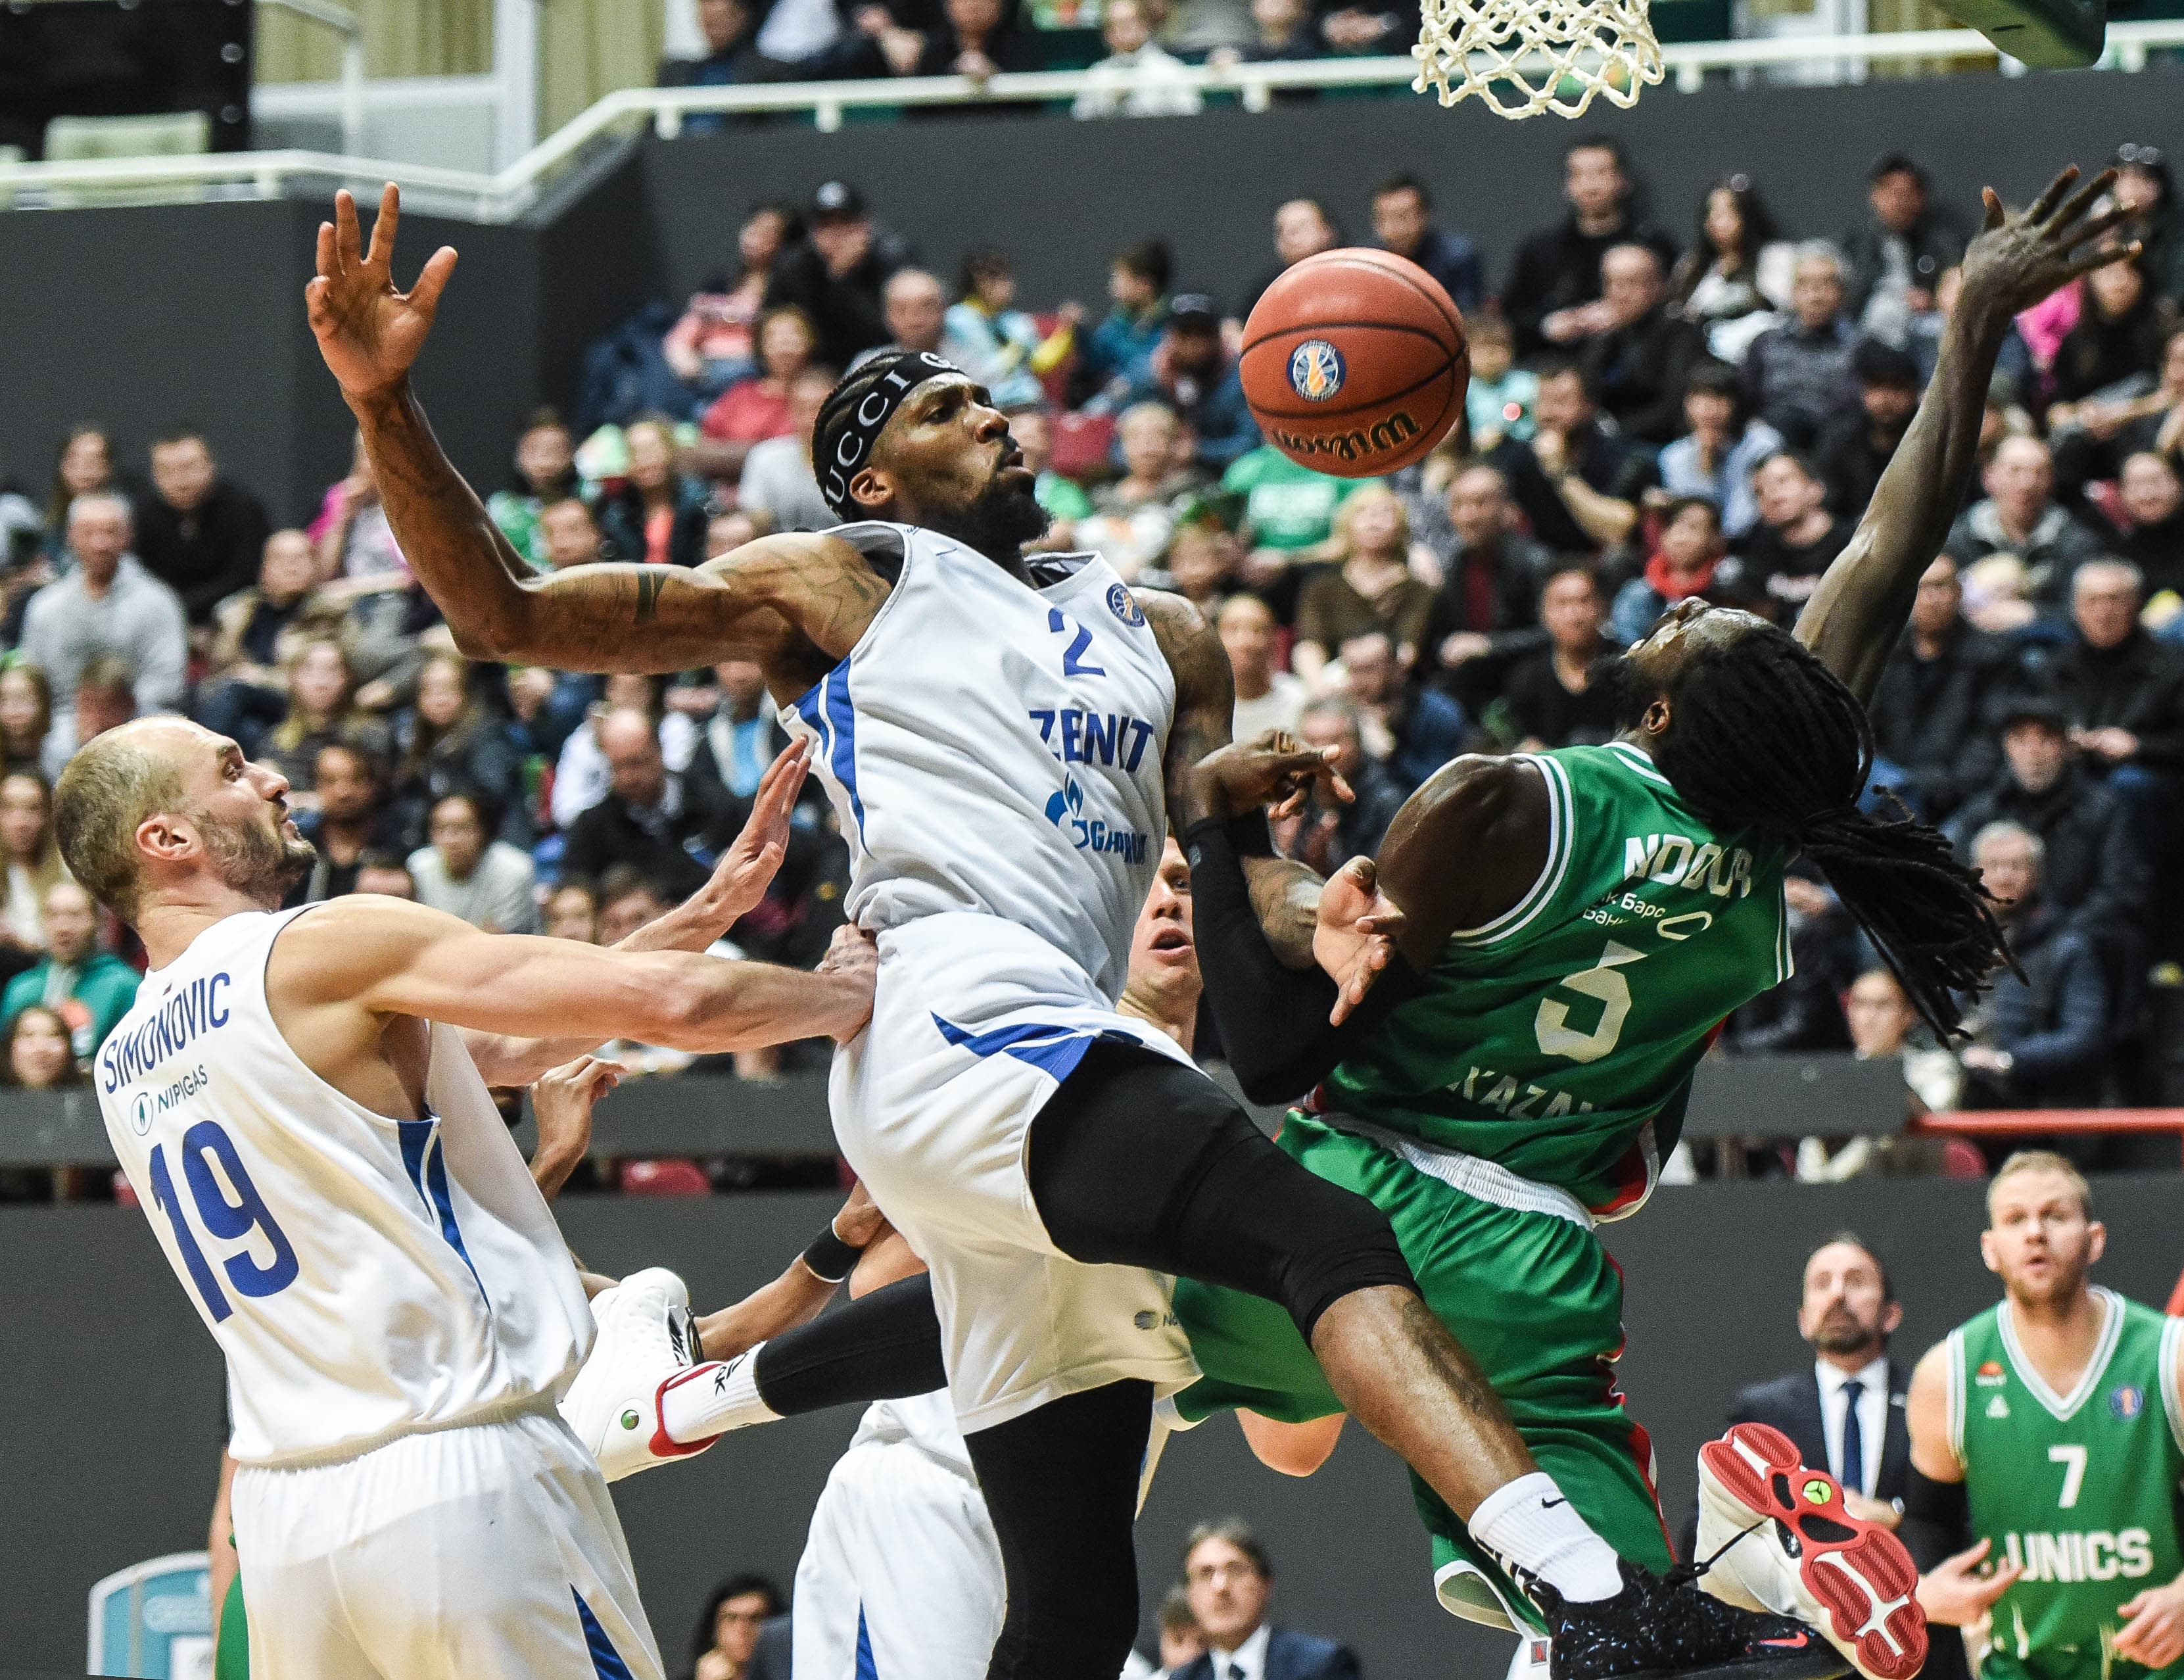 Week 25 In Review: UNICS Chasing 1st Place, Loko Pays Back Astana